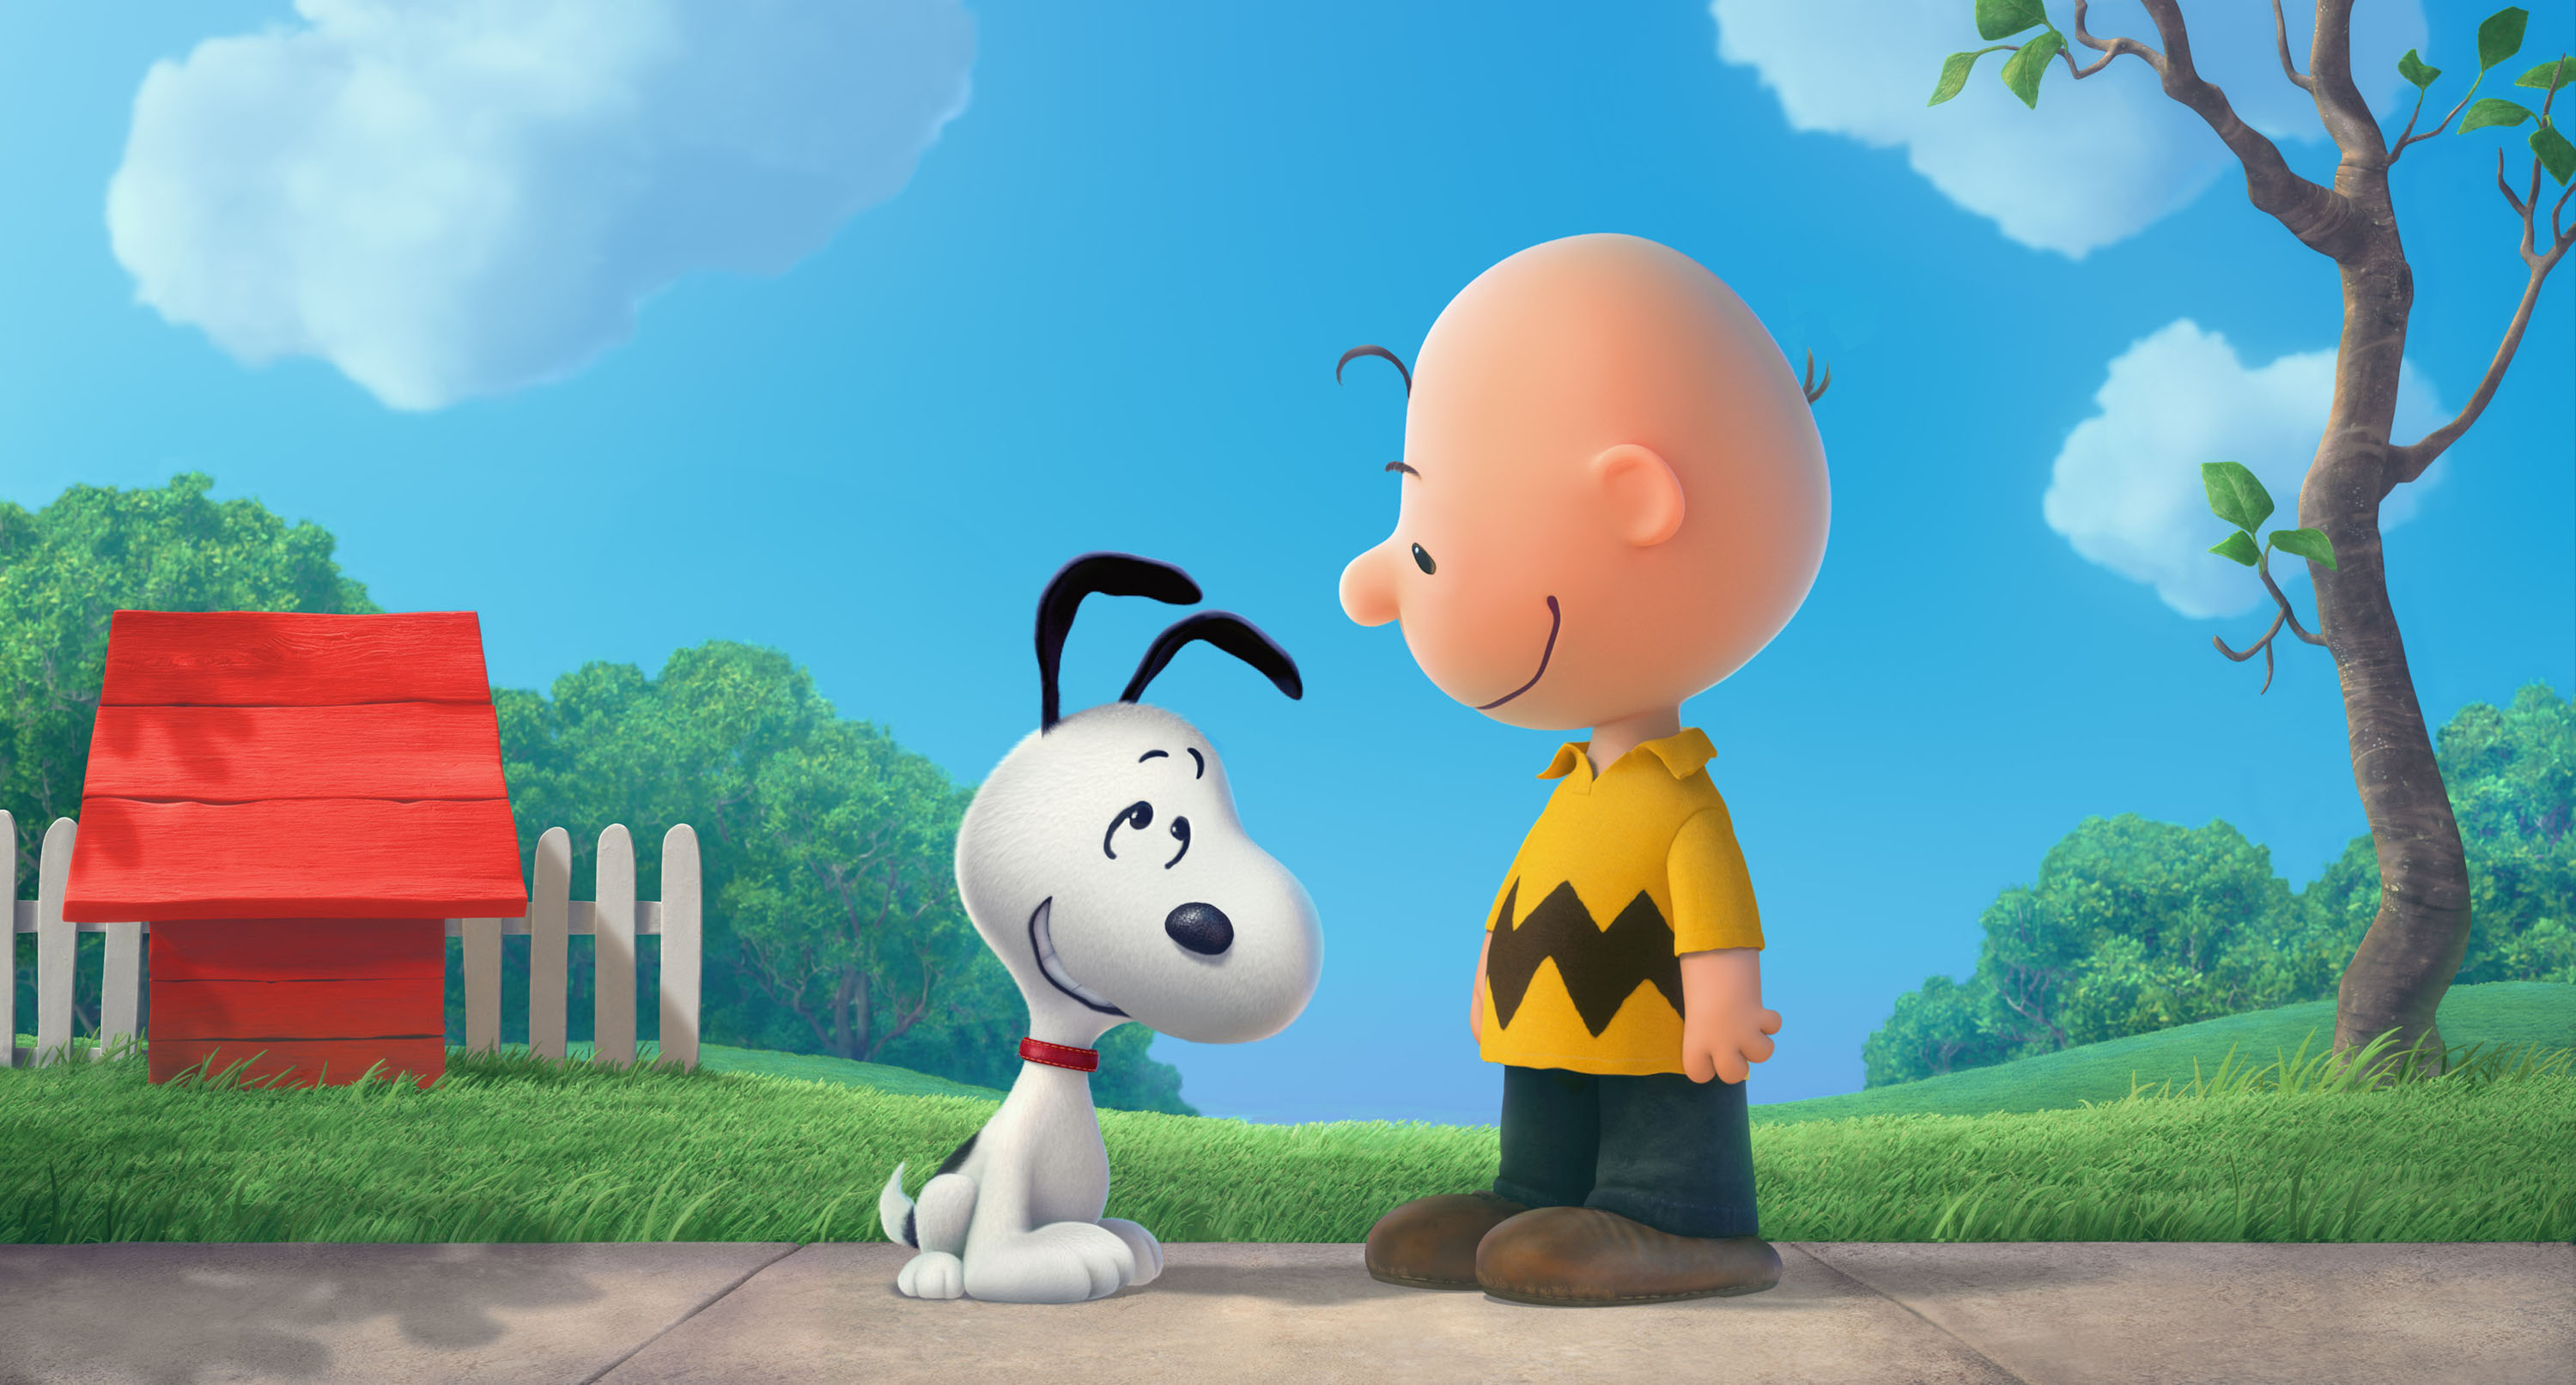 Good Grief! Investors are Betting on a Big Budget Charlie Brown Film